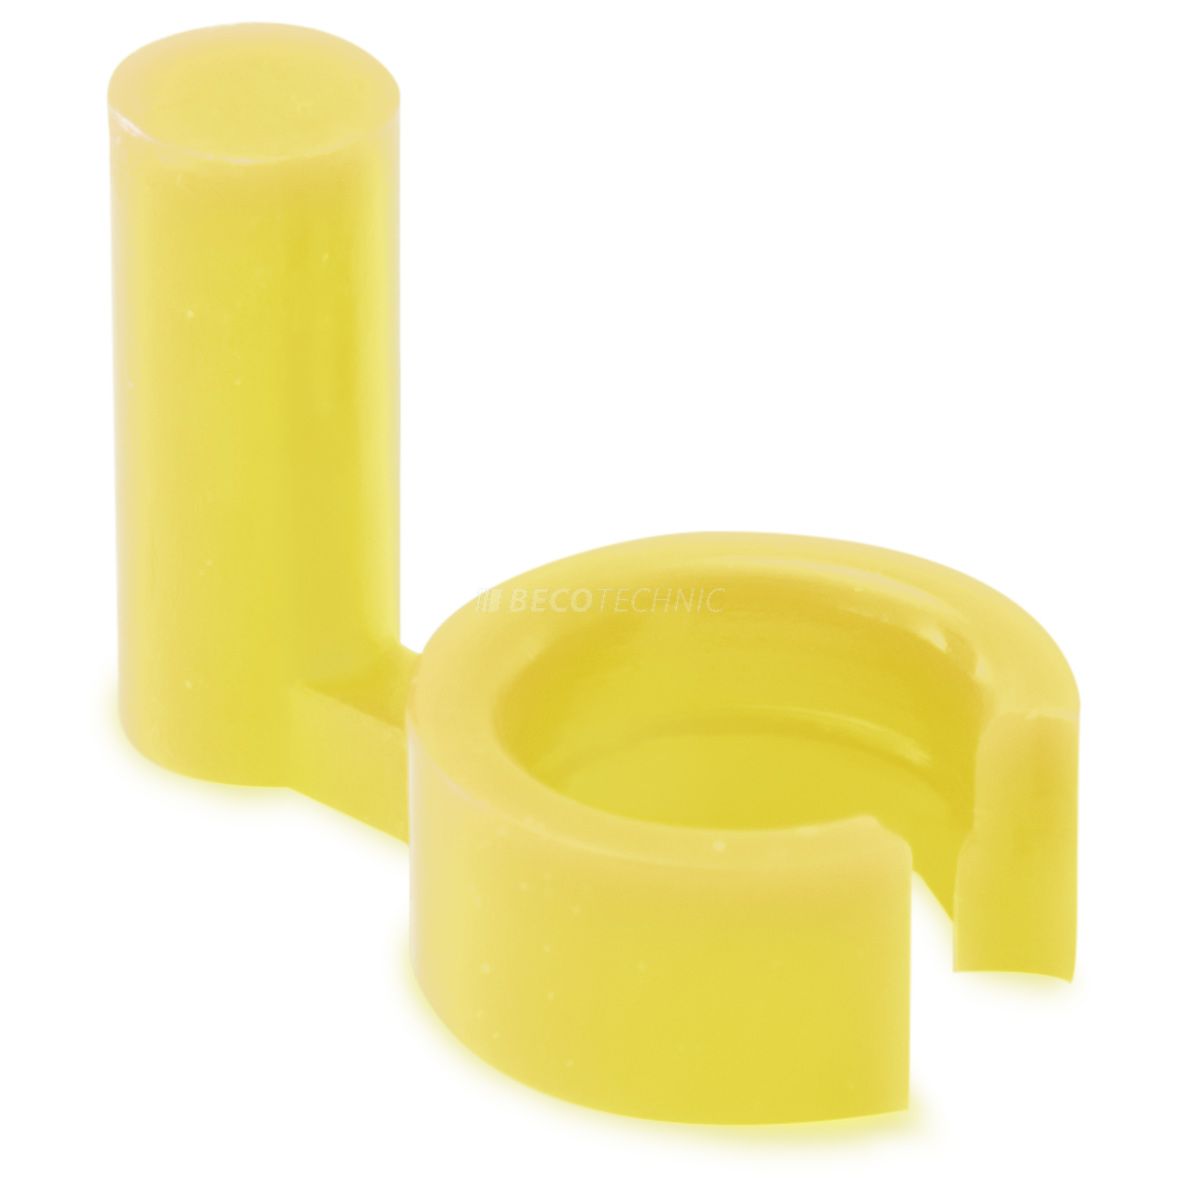 Watch stopper, plastic, yellow, thickness 1,8 mm, 1000 pieces